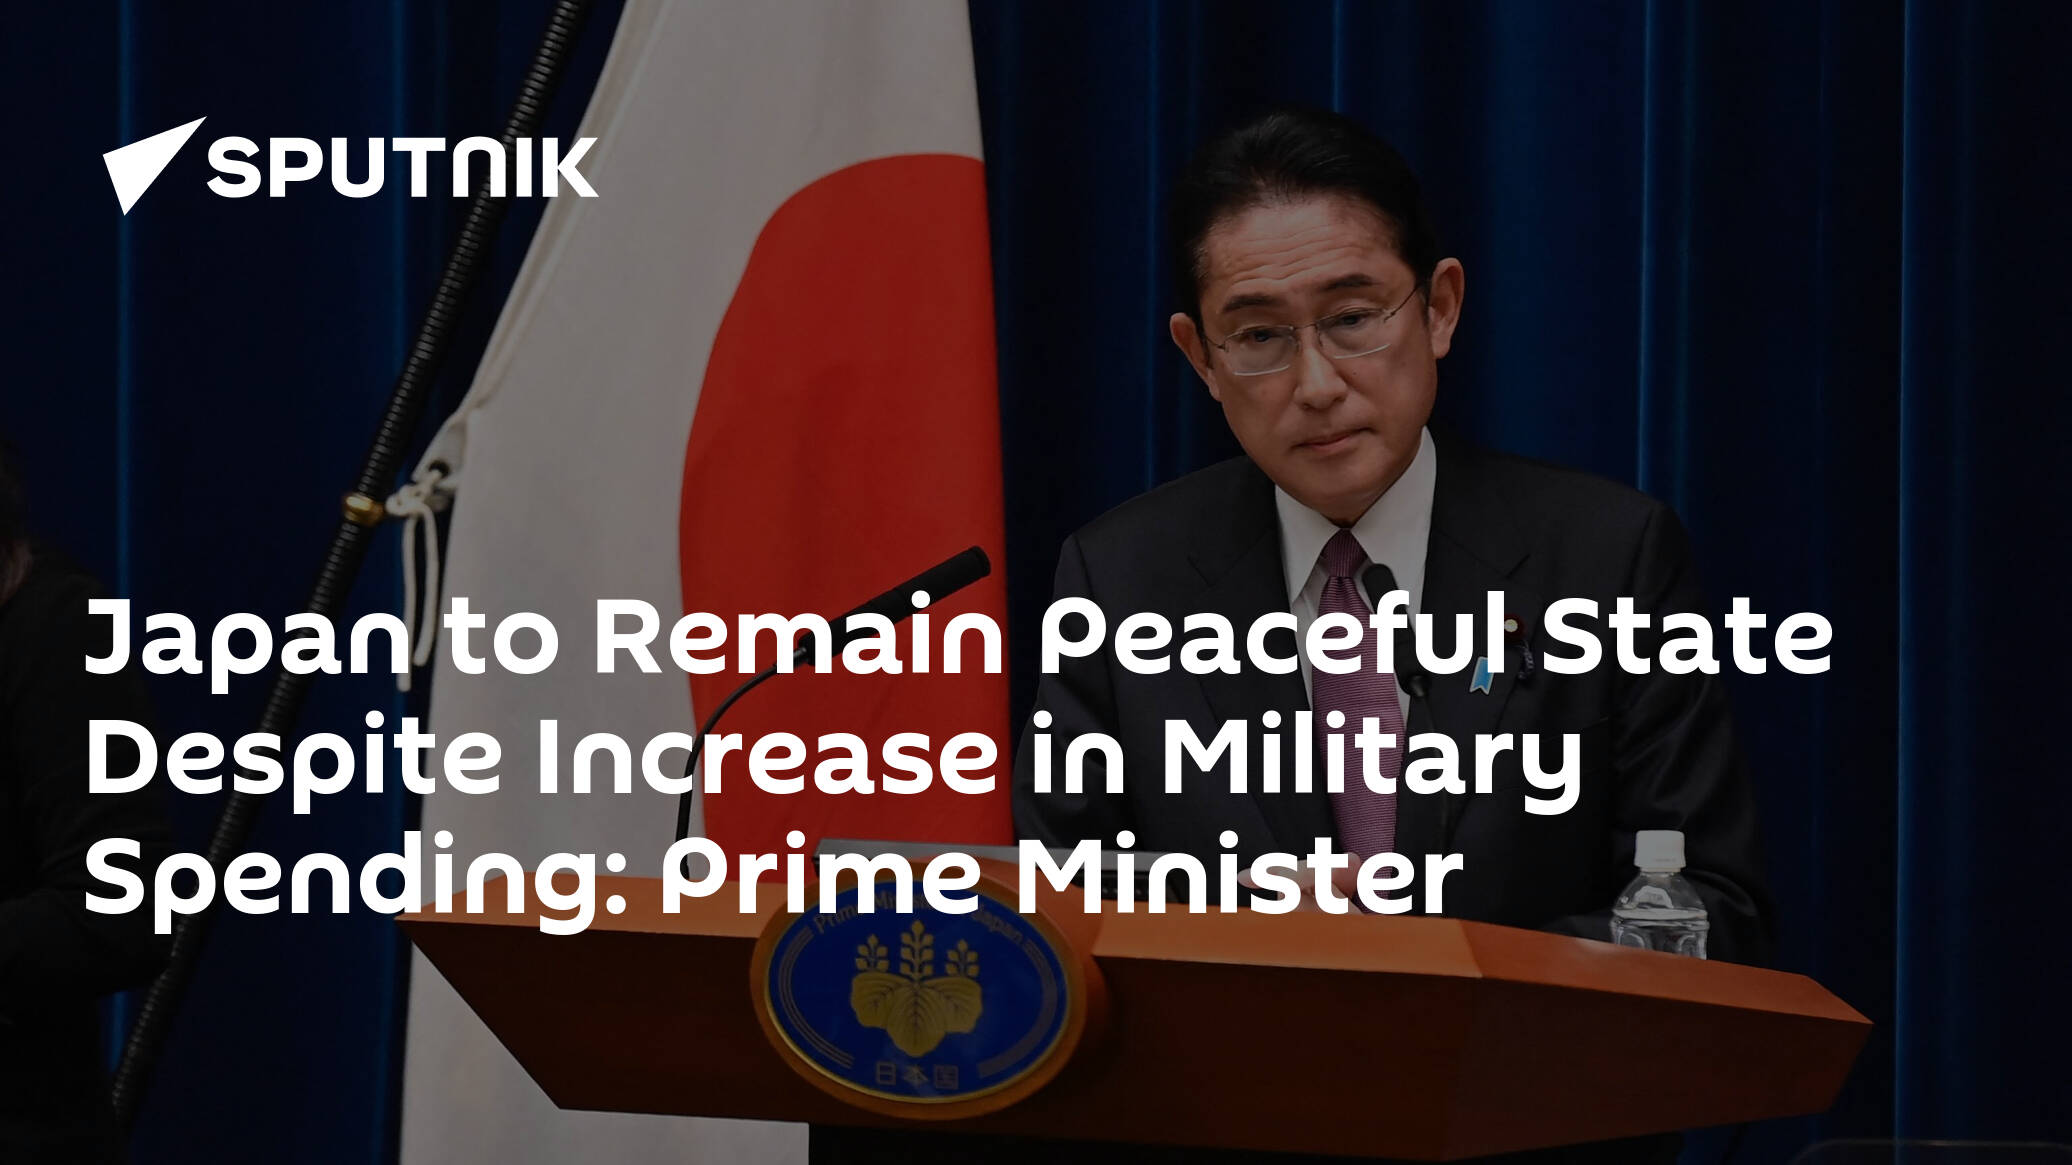 japan-to-remain-peaceful-state-despite-increase-in-military-spending:-prime-minister